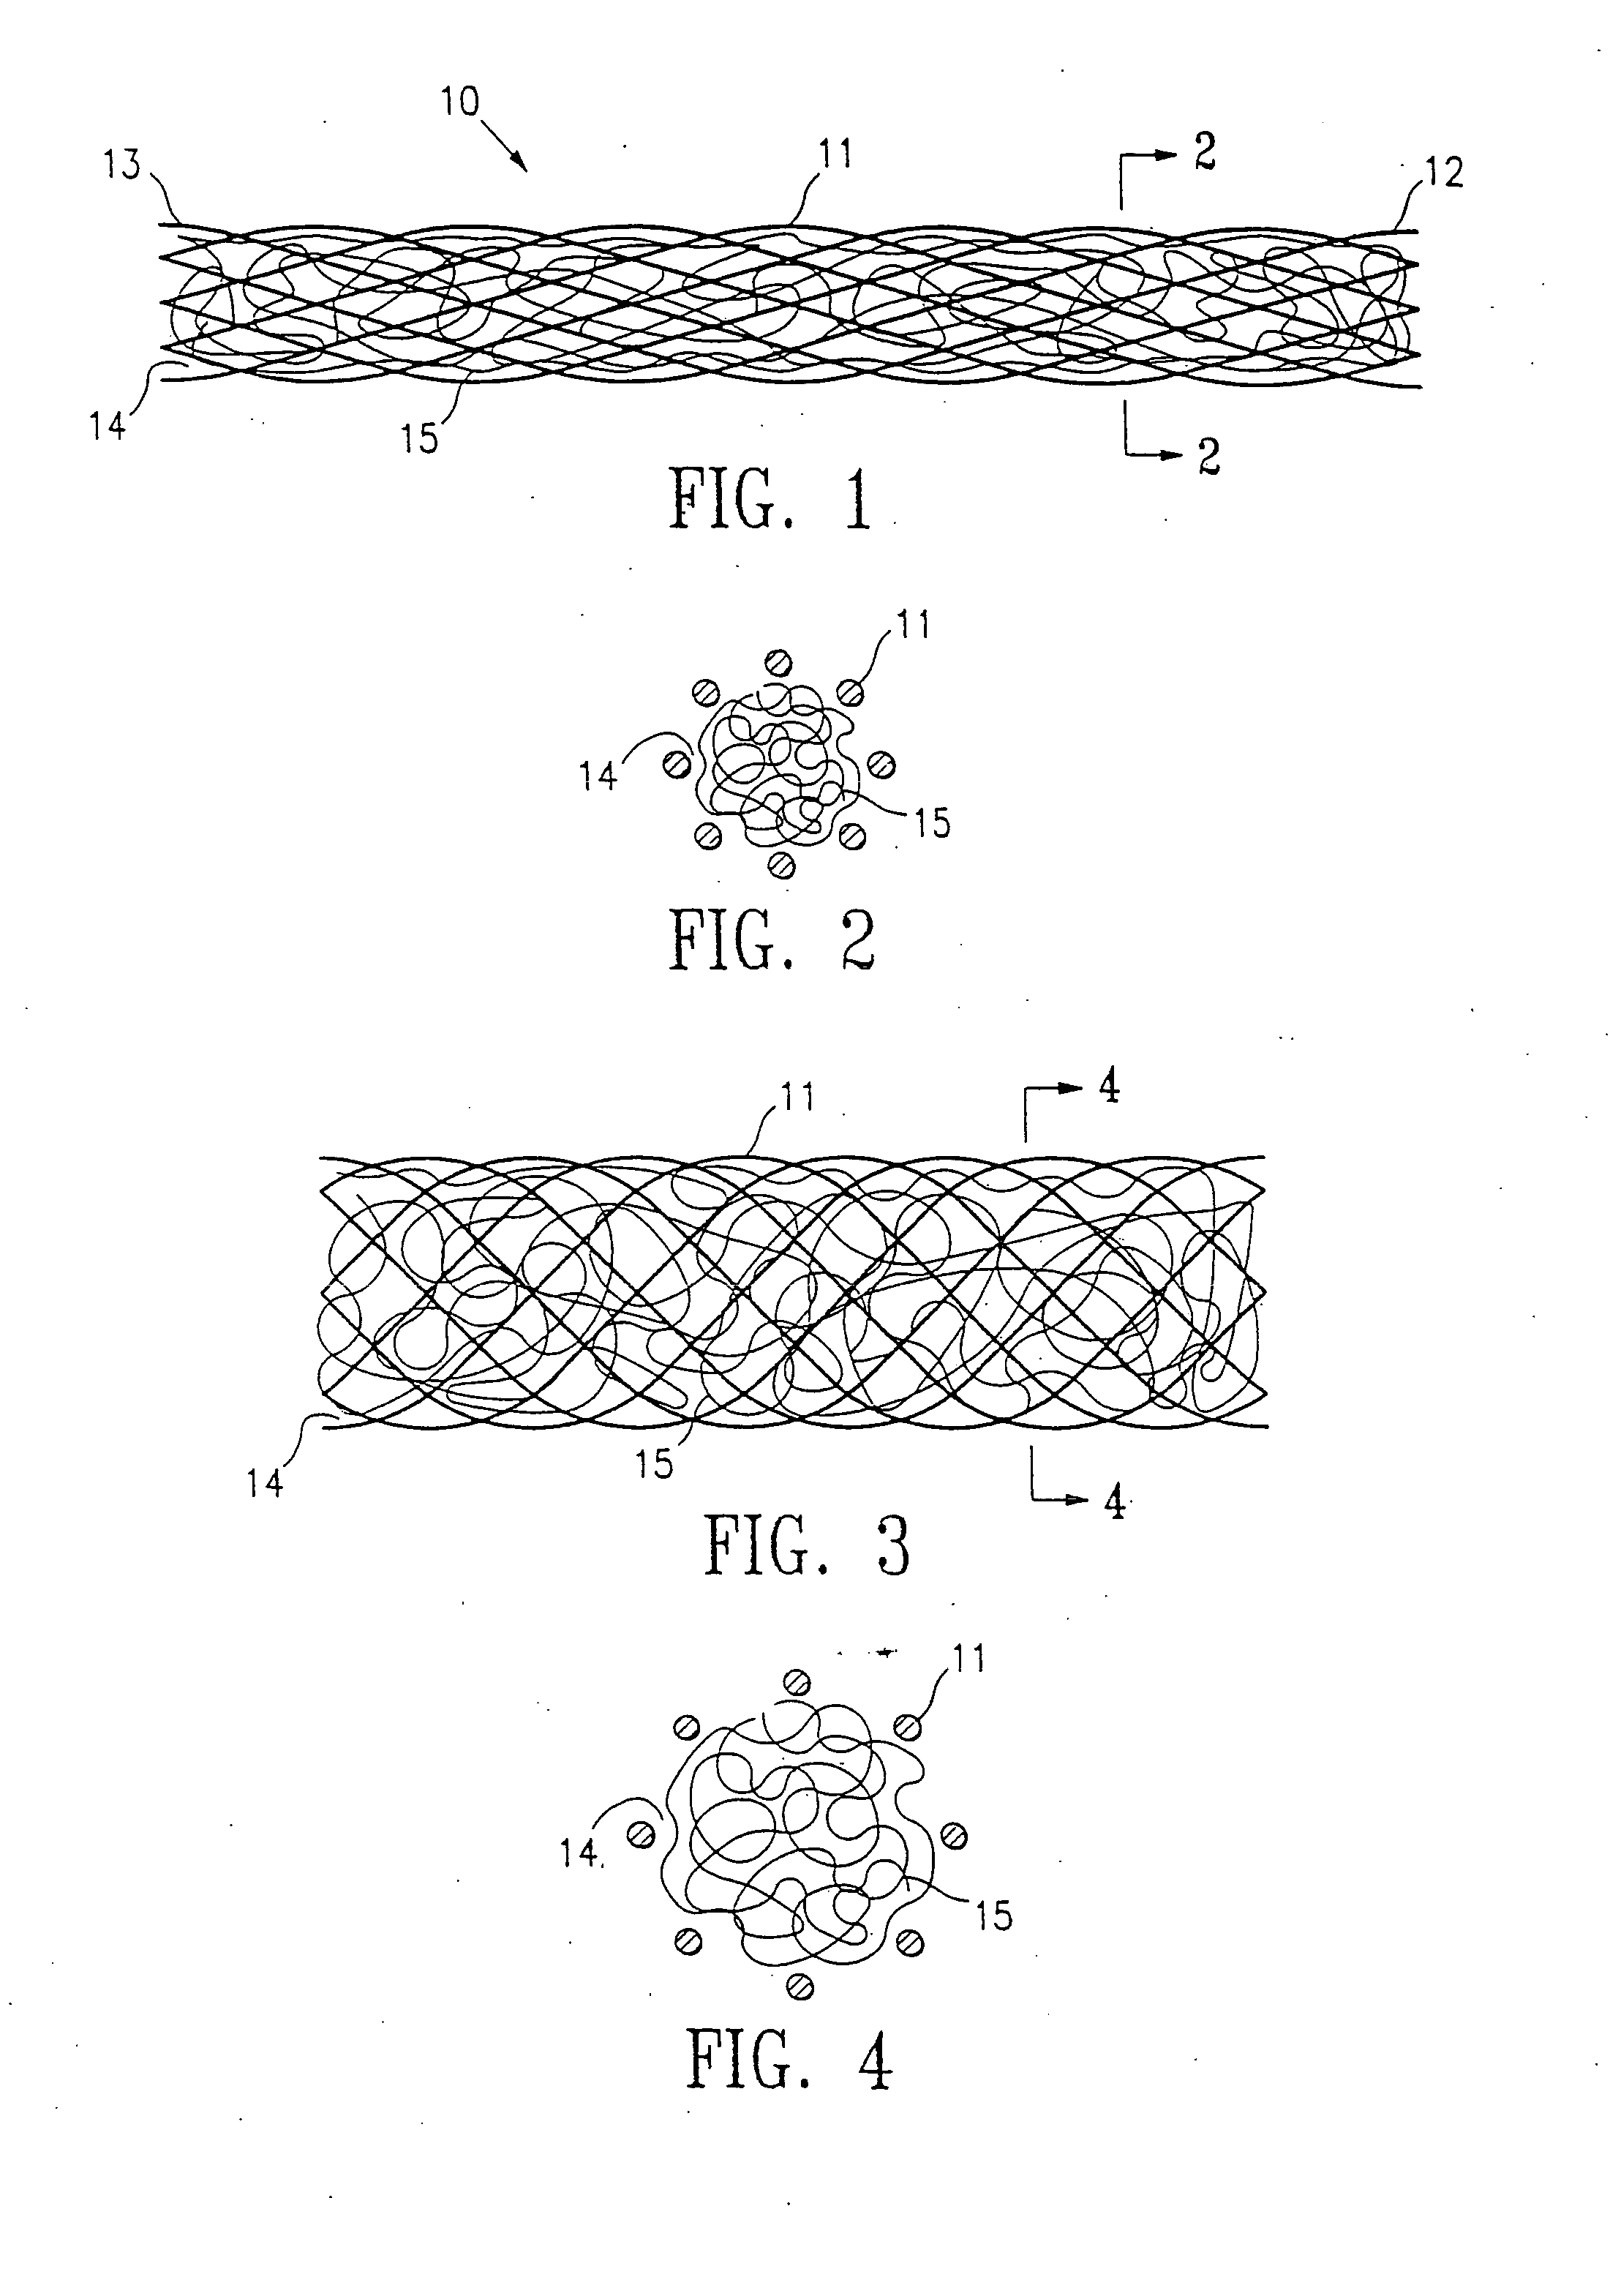 Occluding device and method of use